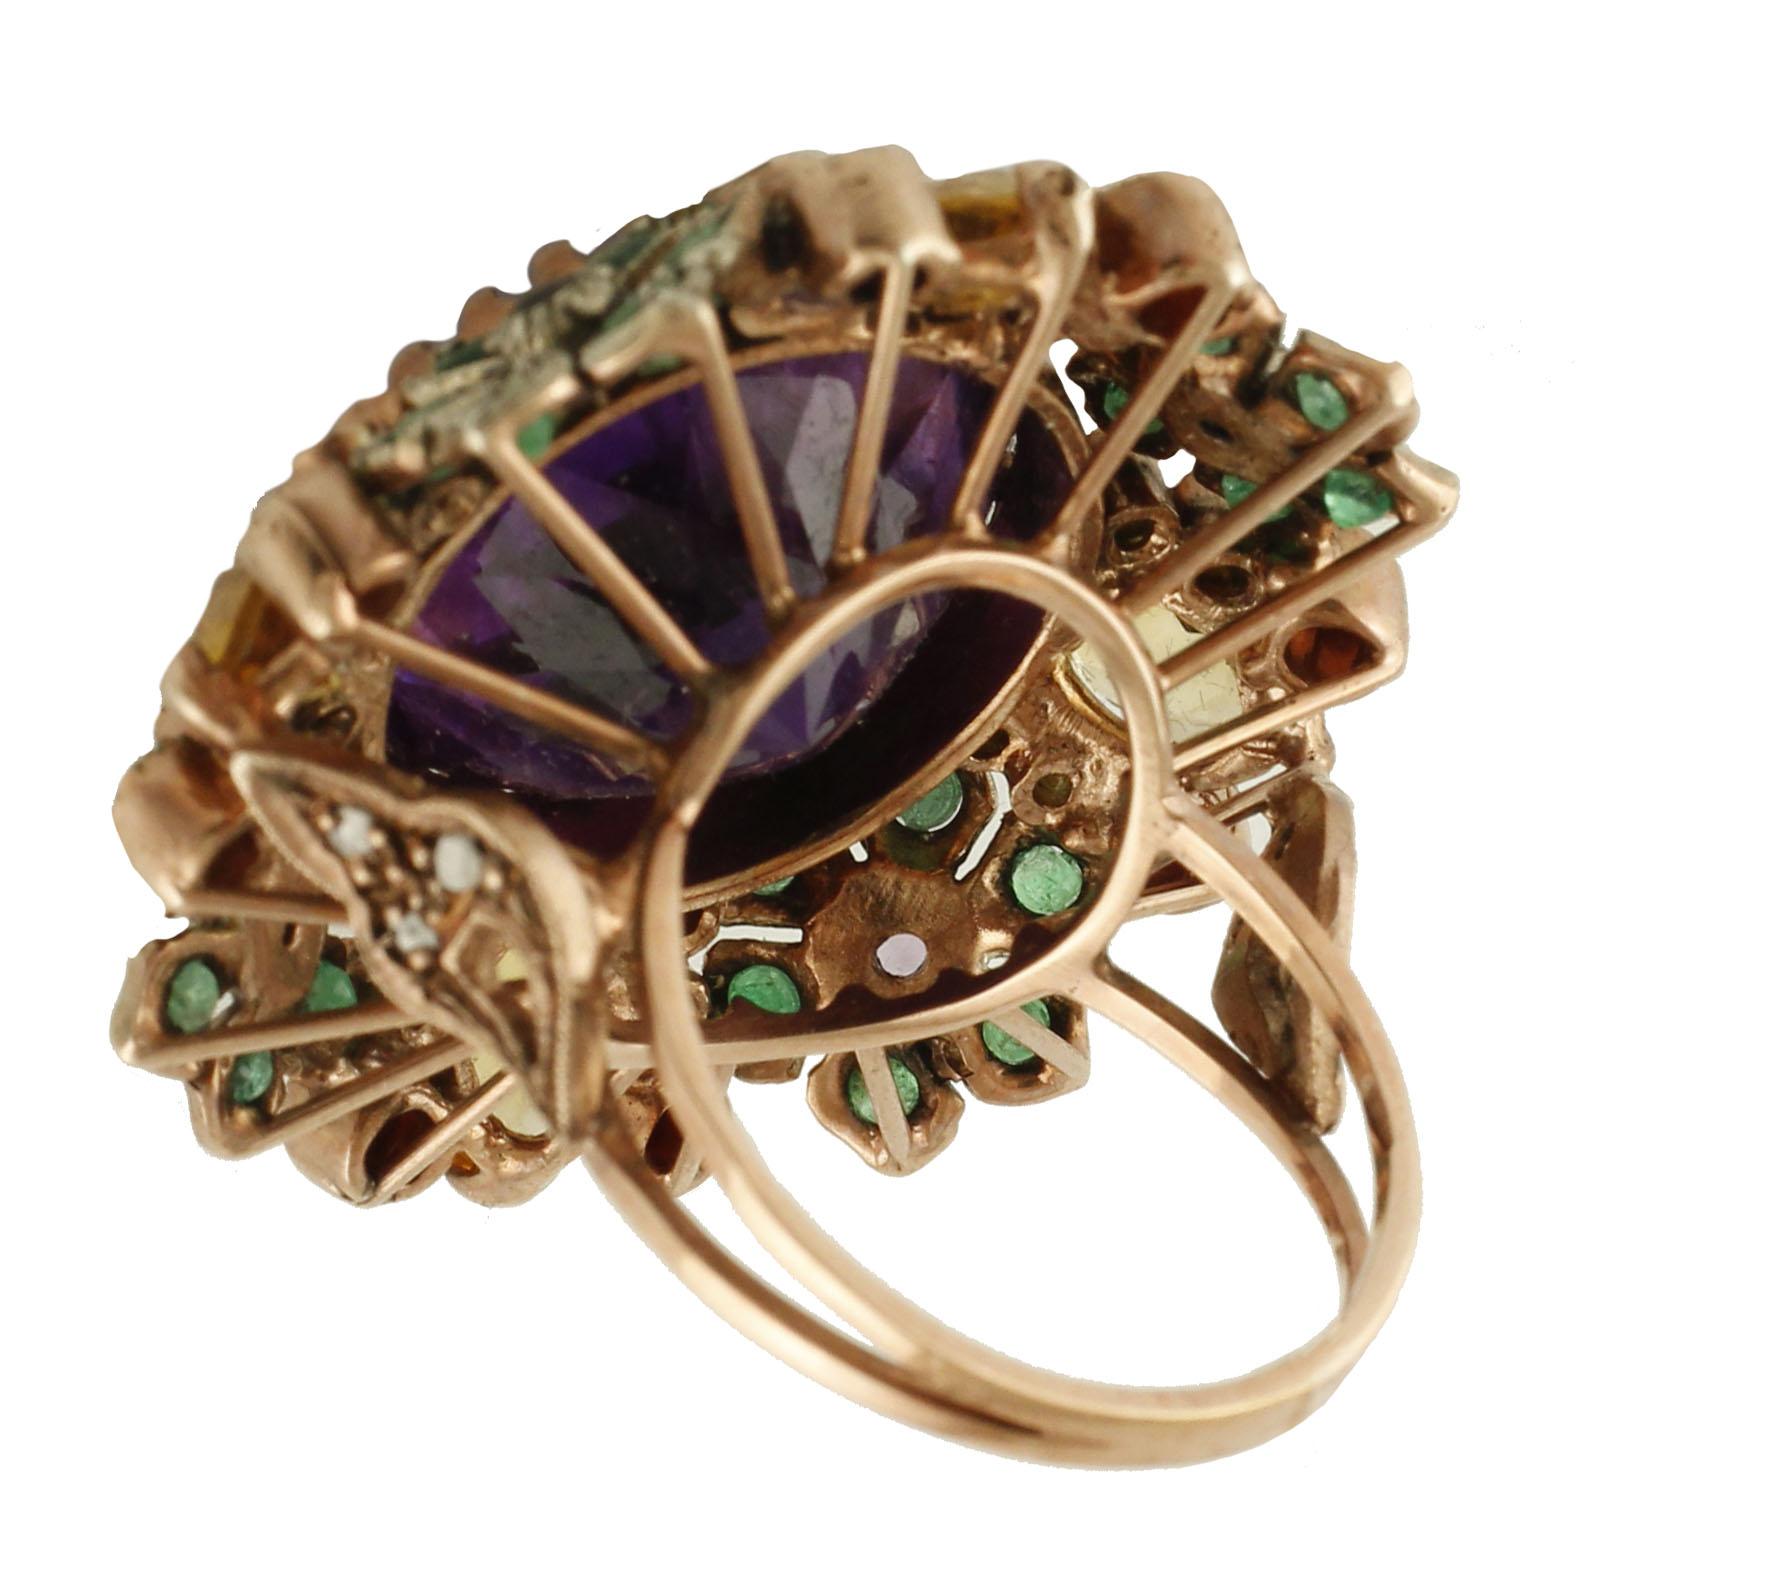 Mixed Cut Diamonds Emeralds Amethysts Topazes Garnets Rose Gold and Silver Cocktail Ring